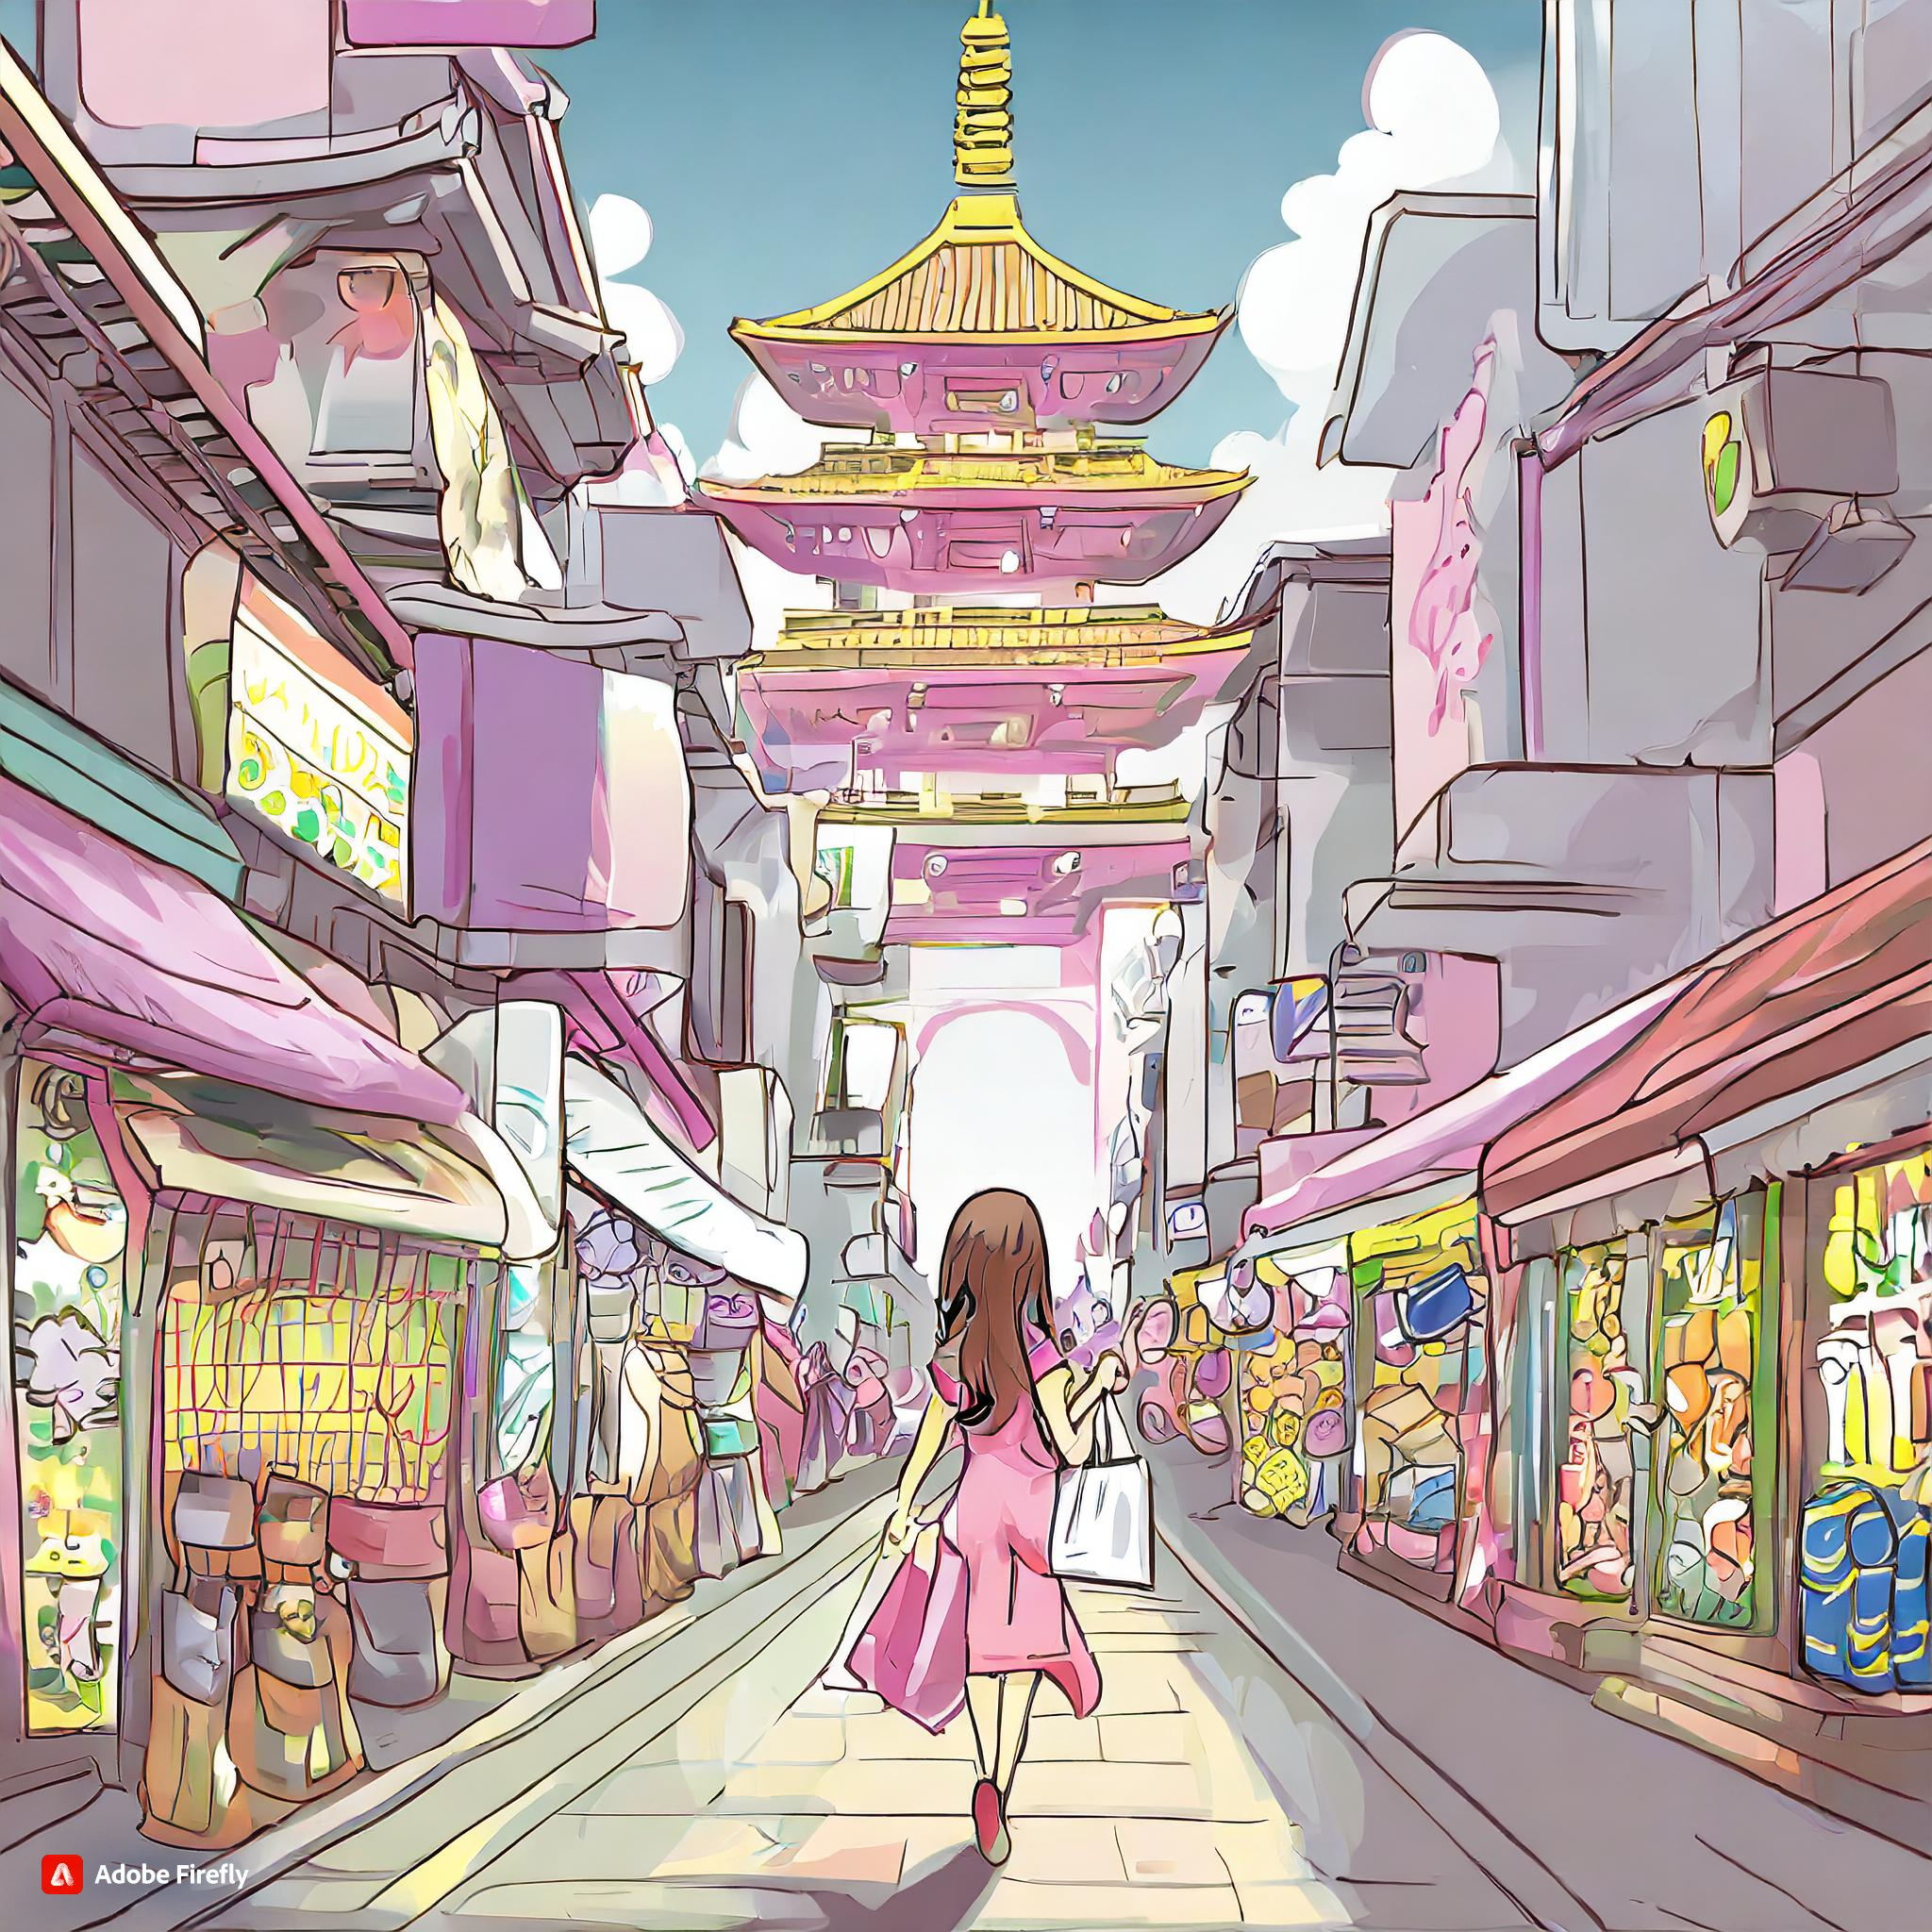 AI art of a shopping area in Japan